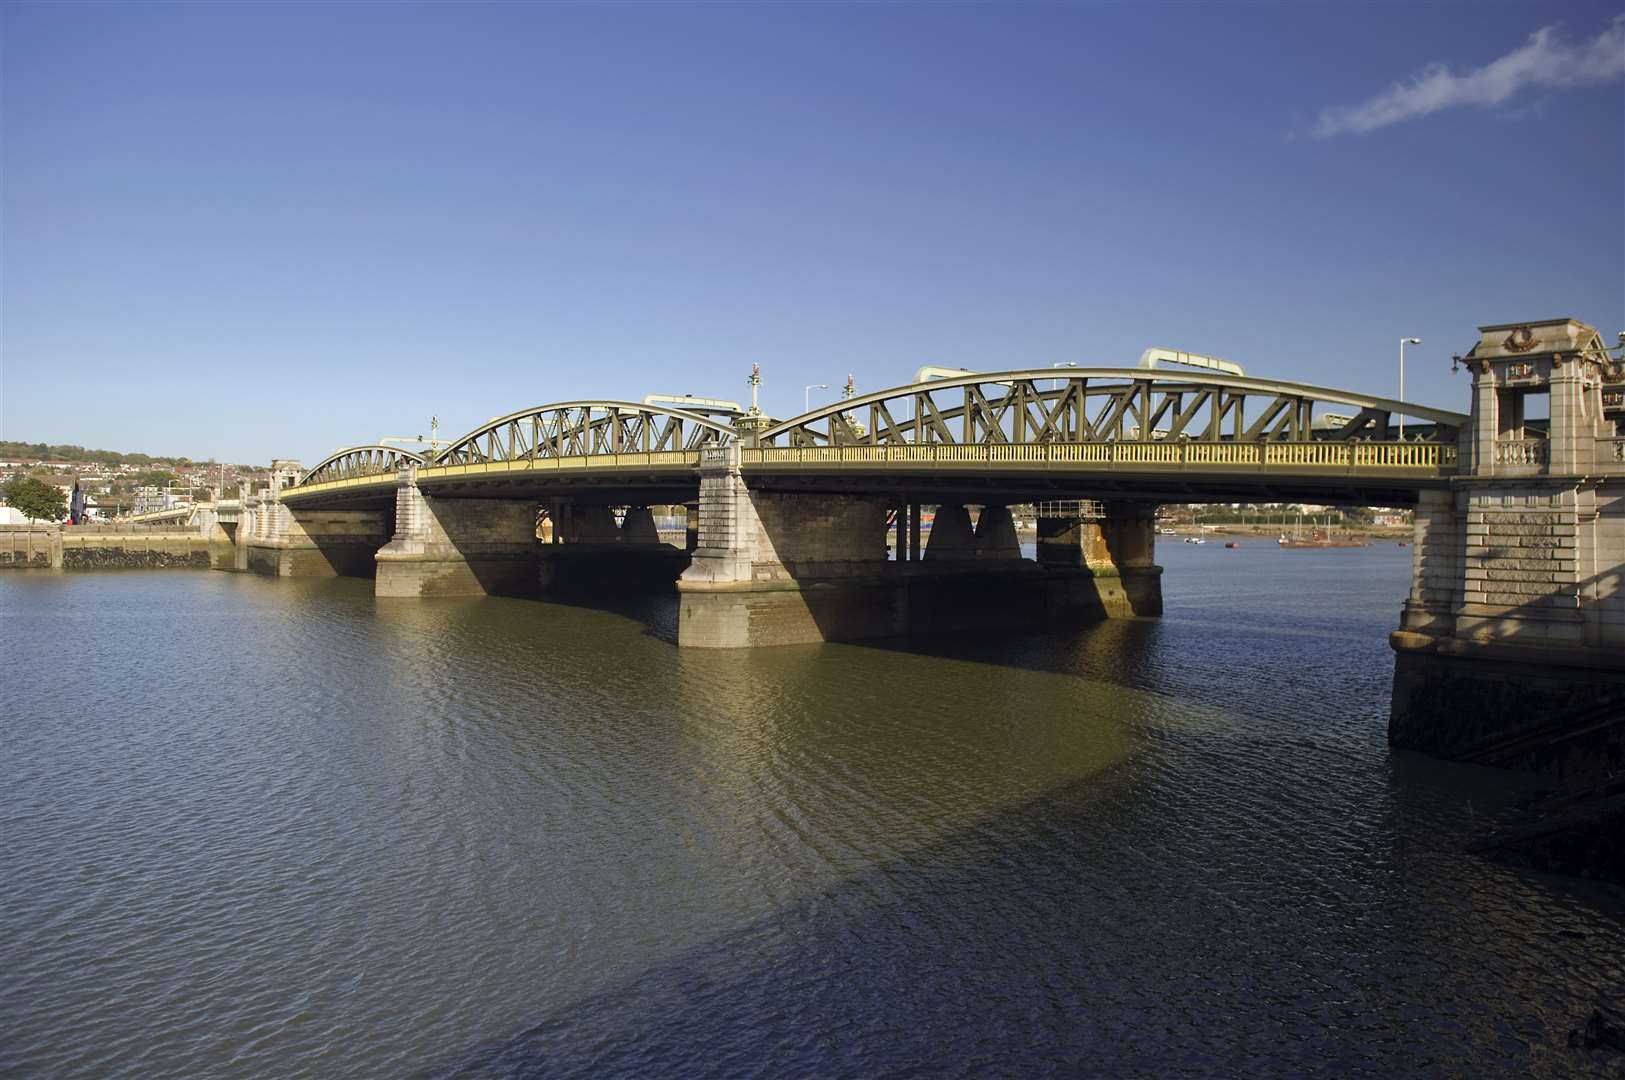 The Old Bridge crossing the Medway at Rochester. It was originally opened in 1856 but needed drastic repairs by 1909 and was rebuilt and reconstructed and opened again in May 1914